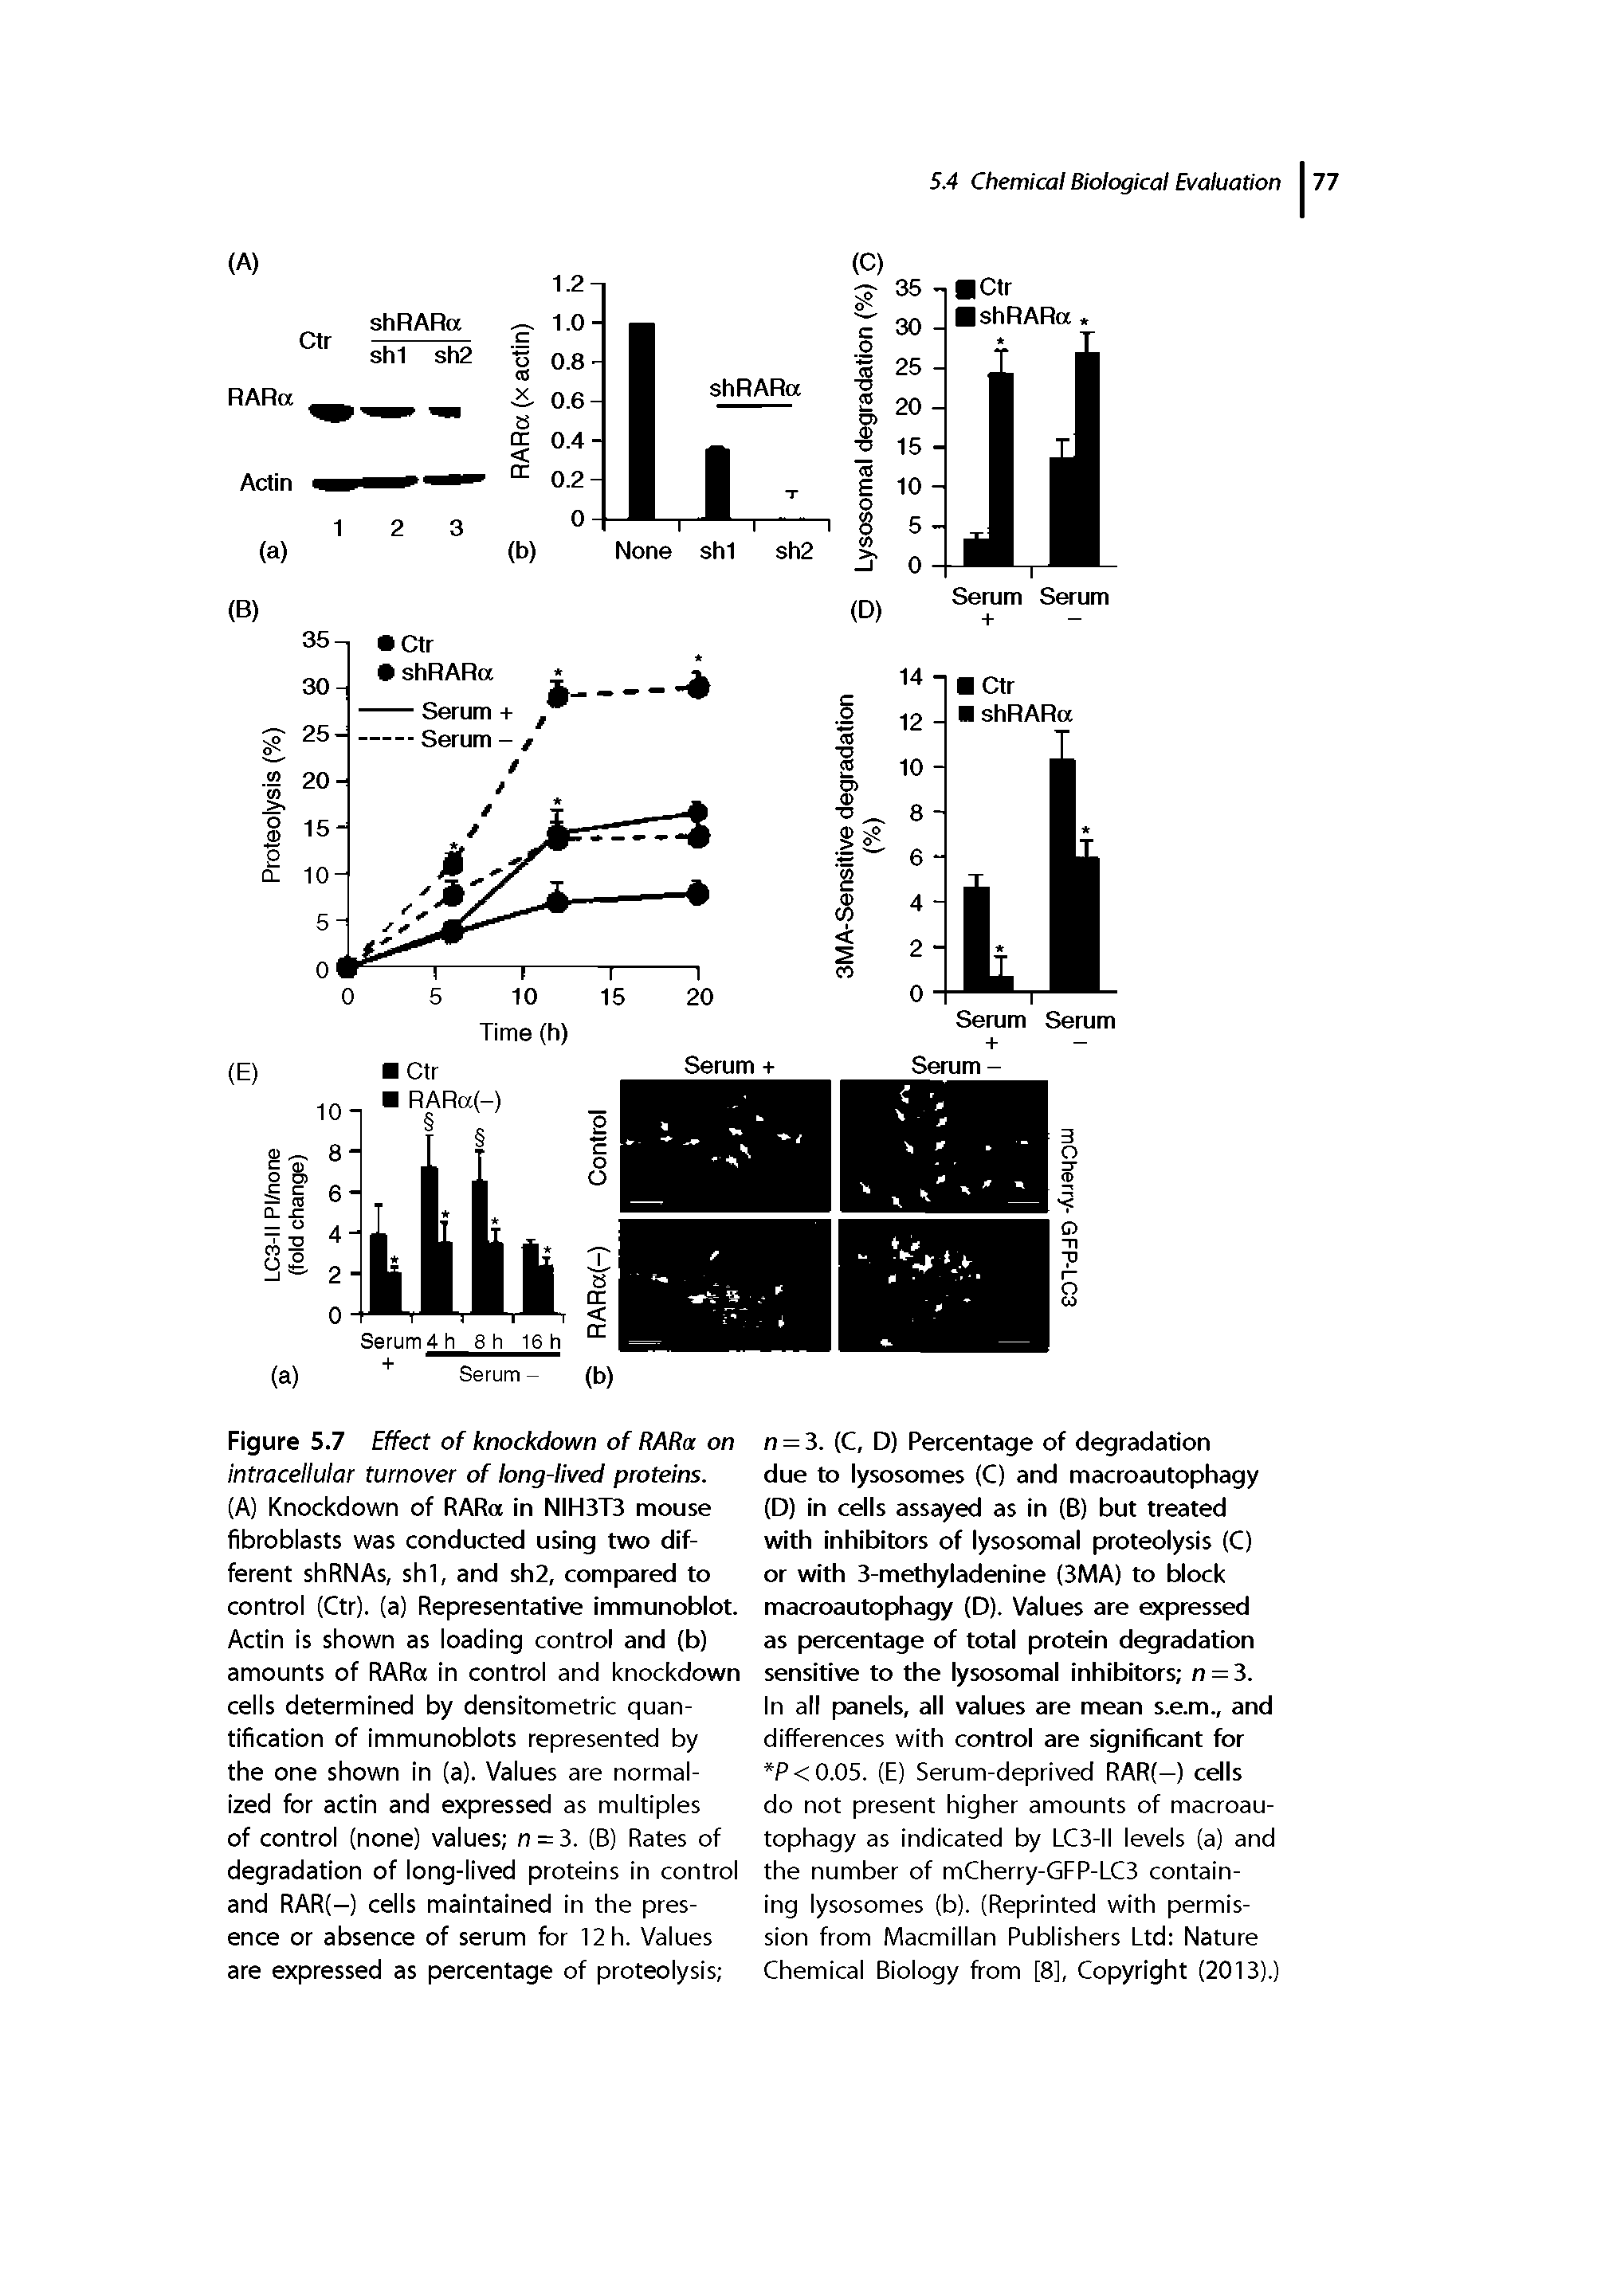 Figure 5.7 Effect of knockdown of RARa on intracellular turnover of long-lived proteins.